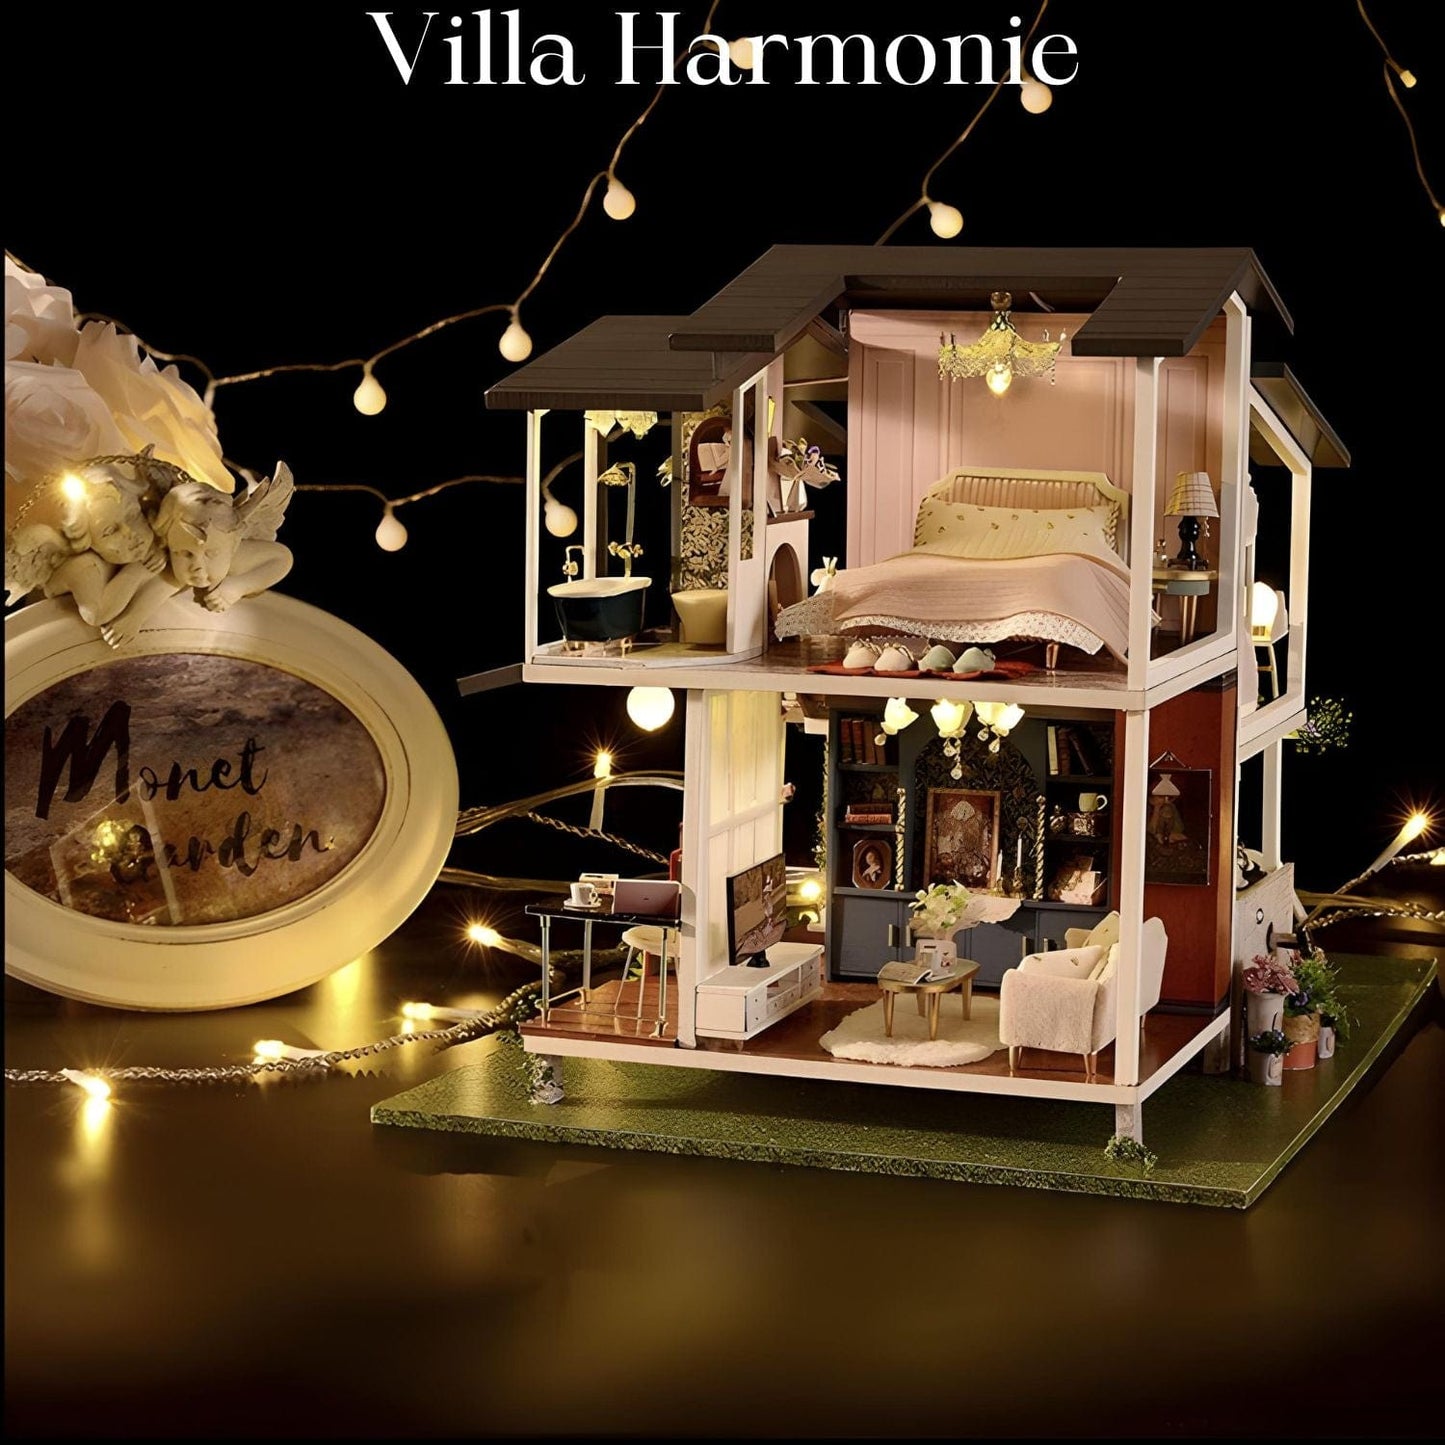 Pièces d'Exceptions Garden Villa Doll House Mini DIY Kit for Making Room Toys, Home Bedroom Decoration with Furniture, Wooden Crafts 3D Puzzle Girl